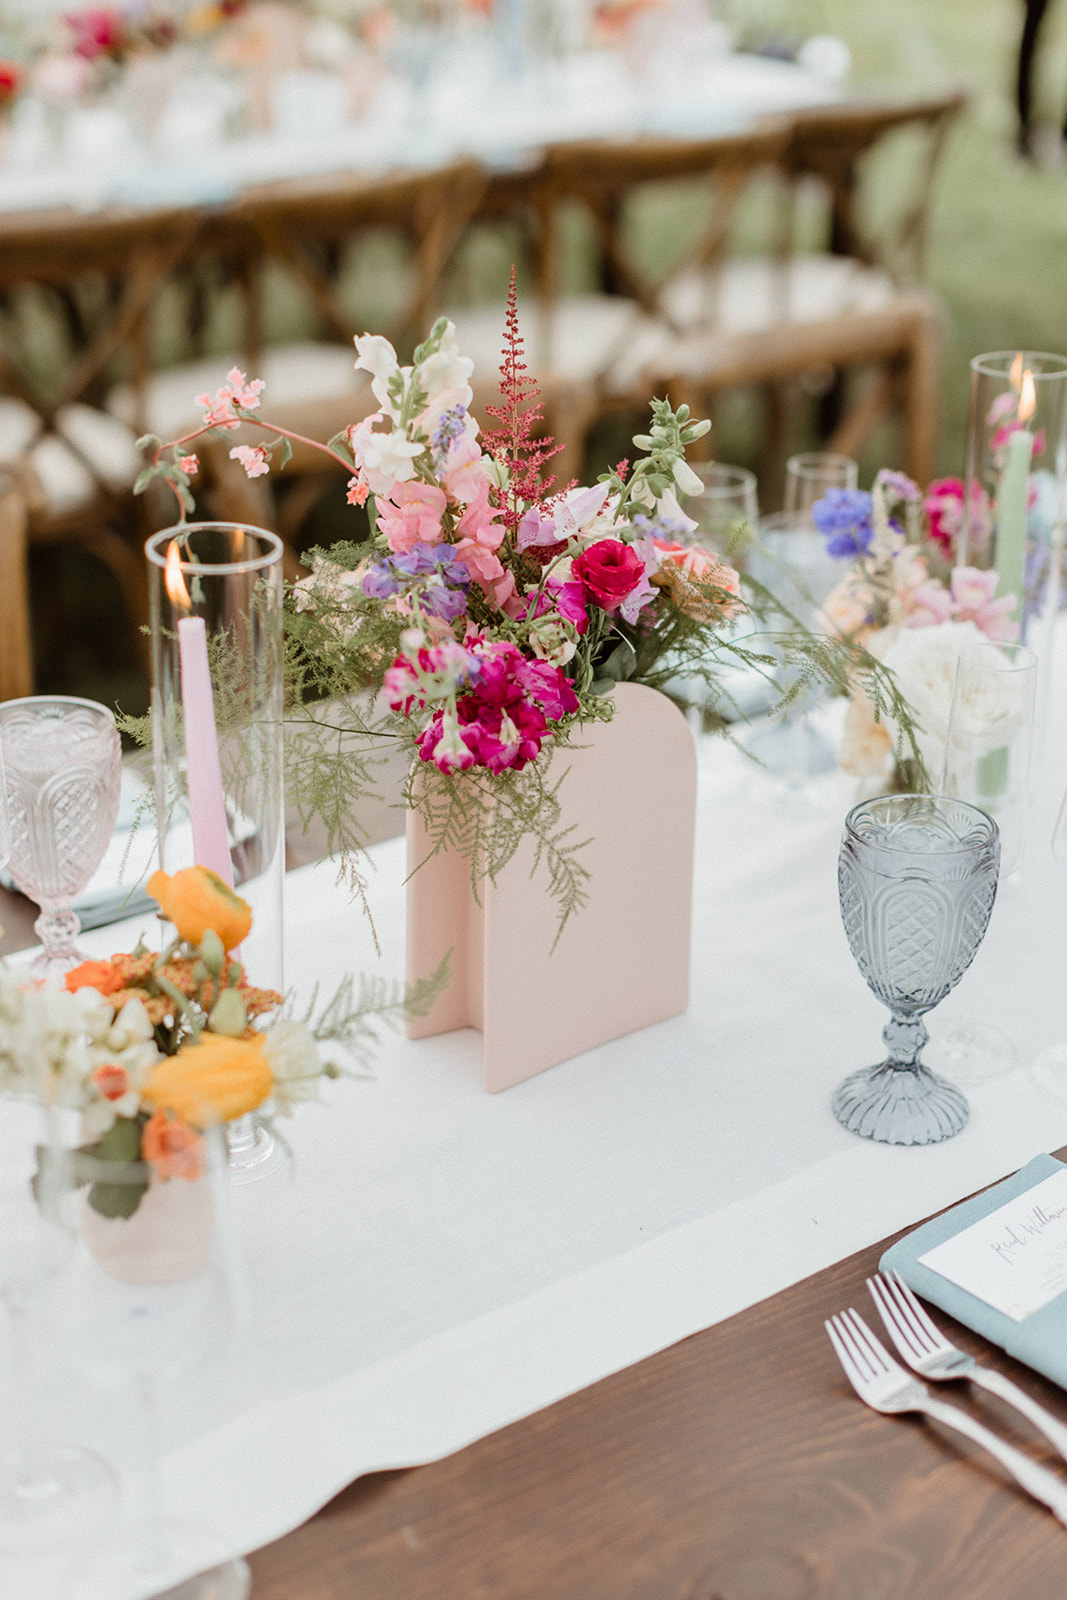 pastel colors in Maine wedding reception ready for the party